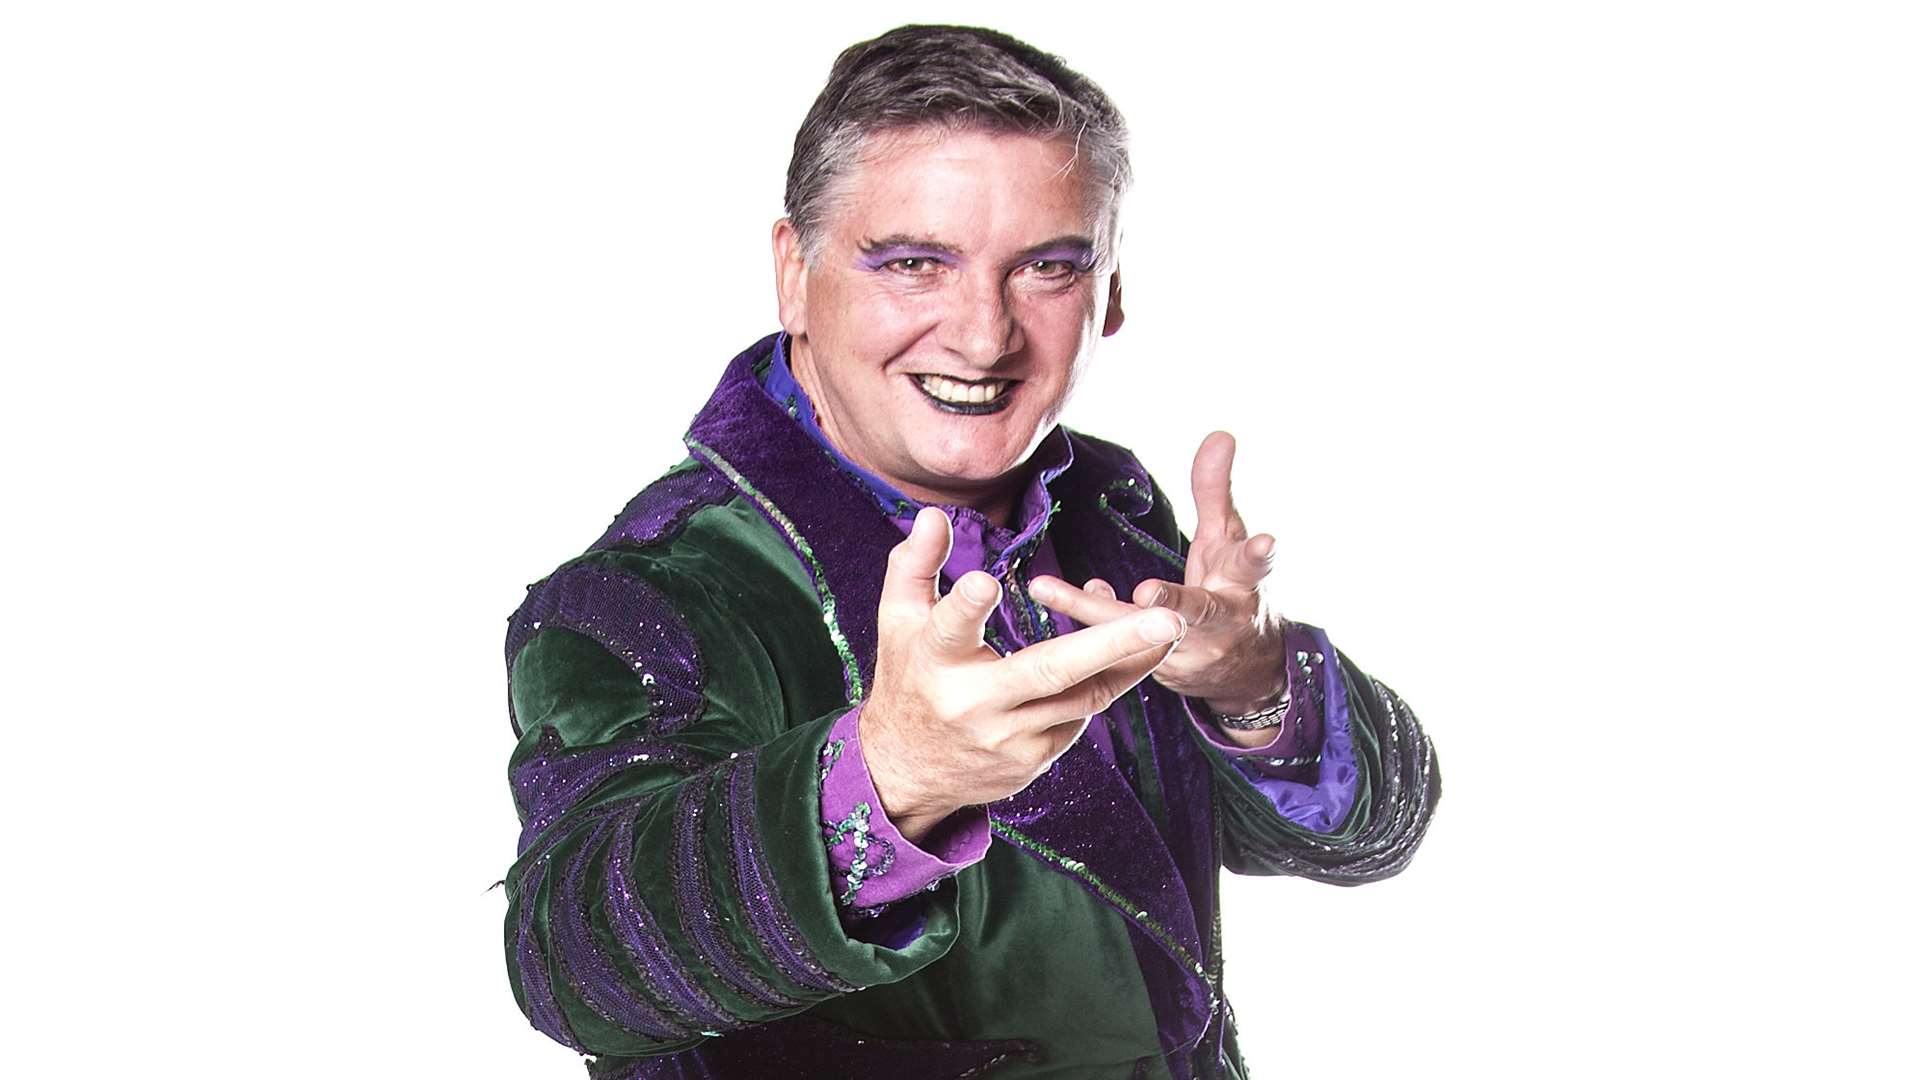 Olympic gold medalist and Dancing on Ice head judge Robin Cousins is the Evil Fleshcreep